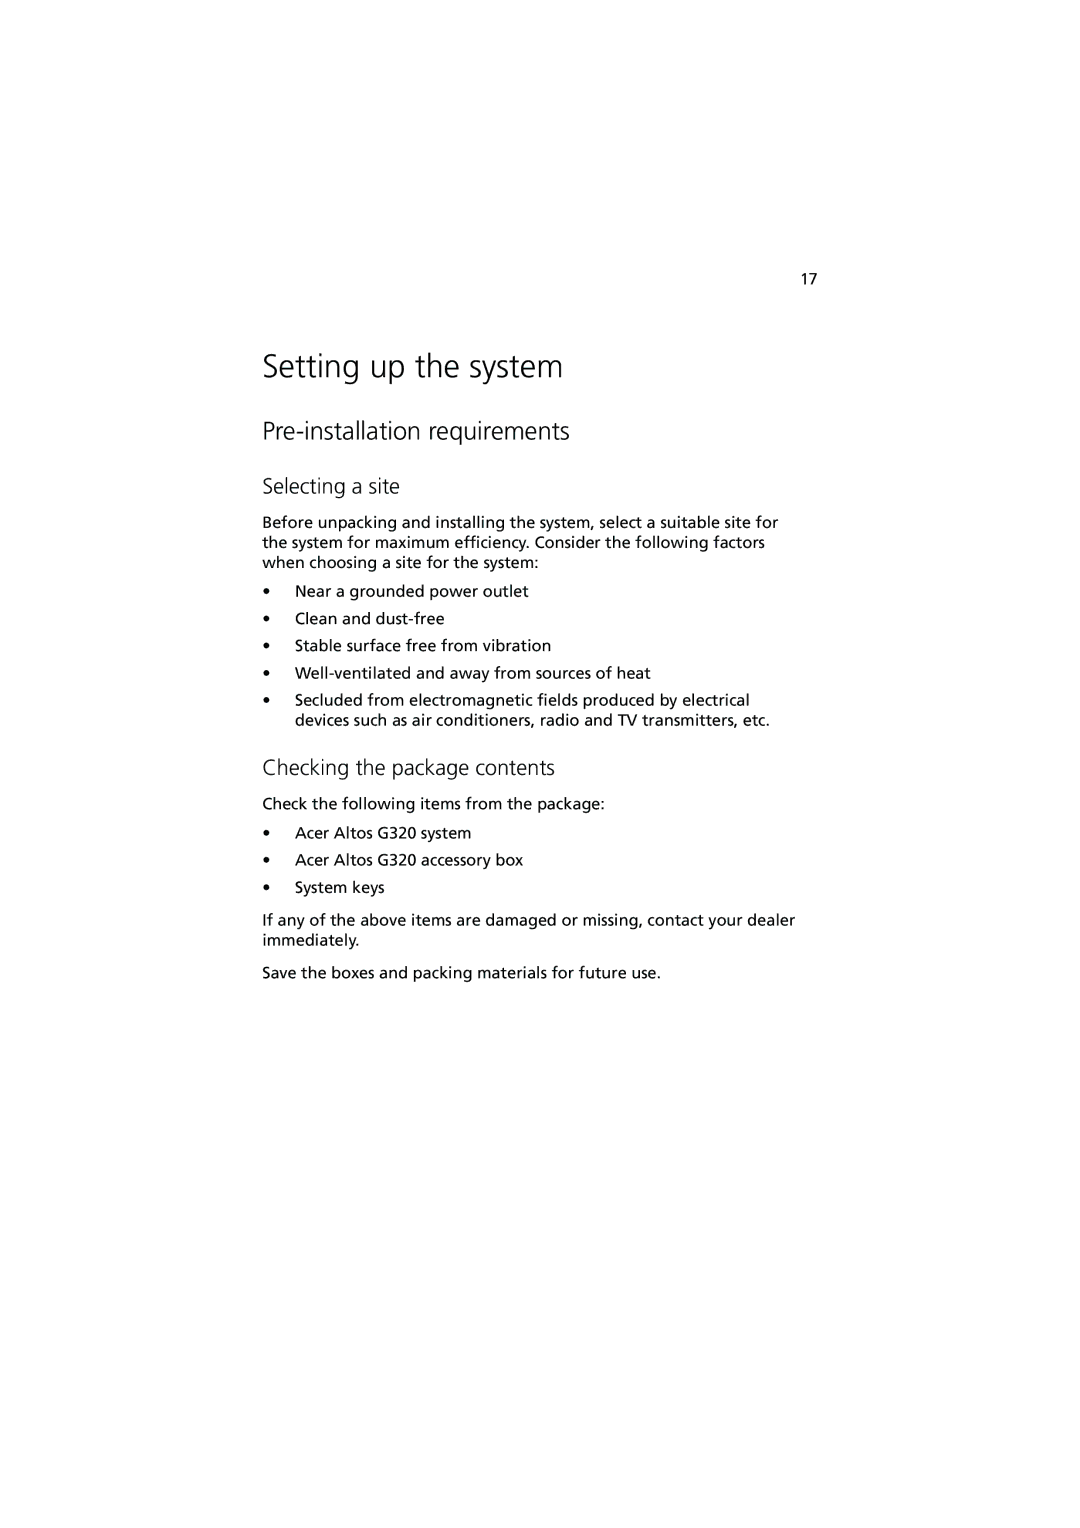 Acer G320 Series Setting up the system, Pre-installation requirements, Selecting a site, Checking the package contents 